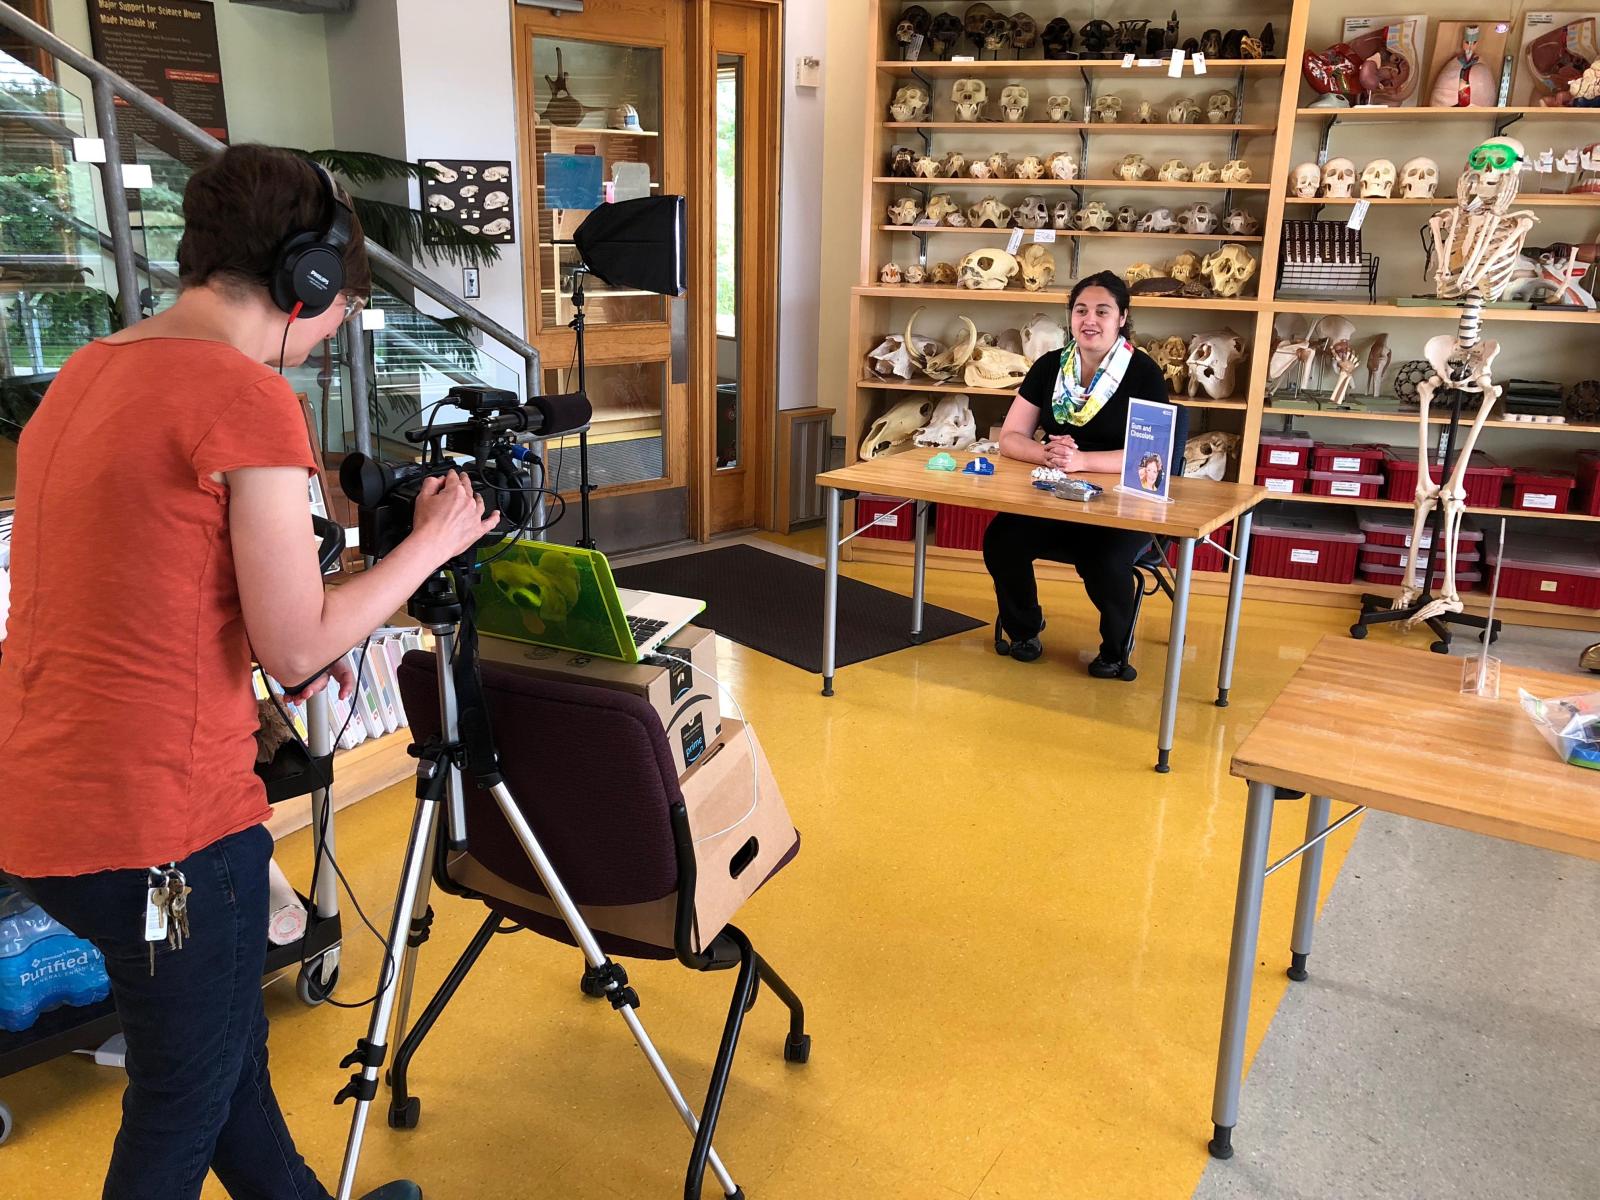 A behind the scenes perspective of filming a Chemistry training video with a videographer filming and educator explaining a chemistry related activity